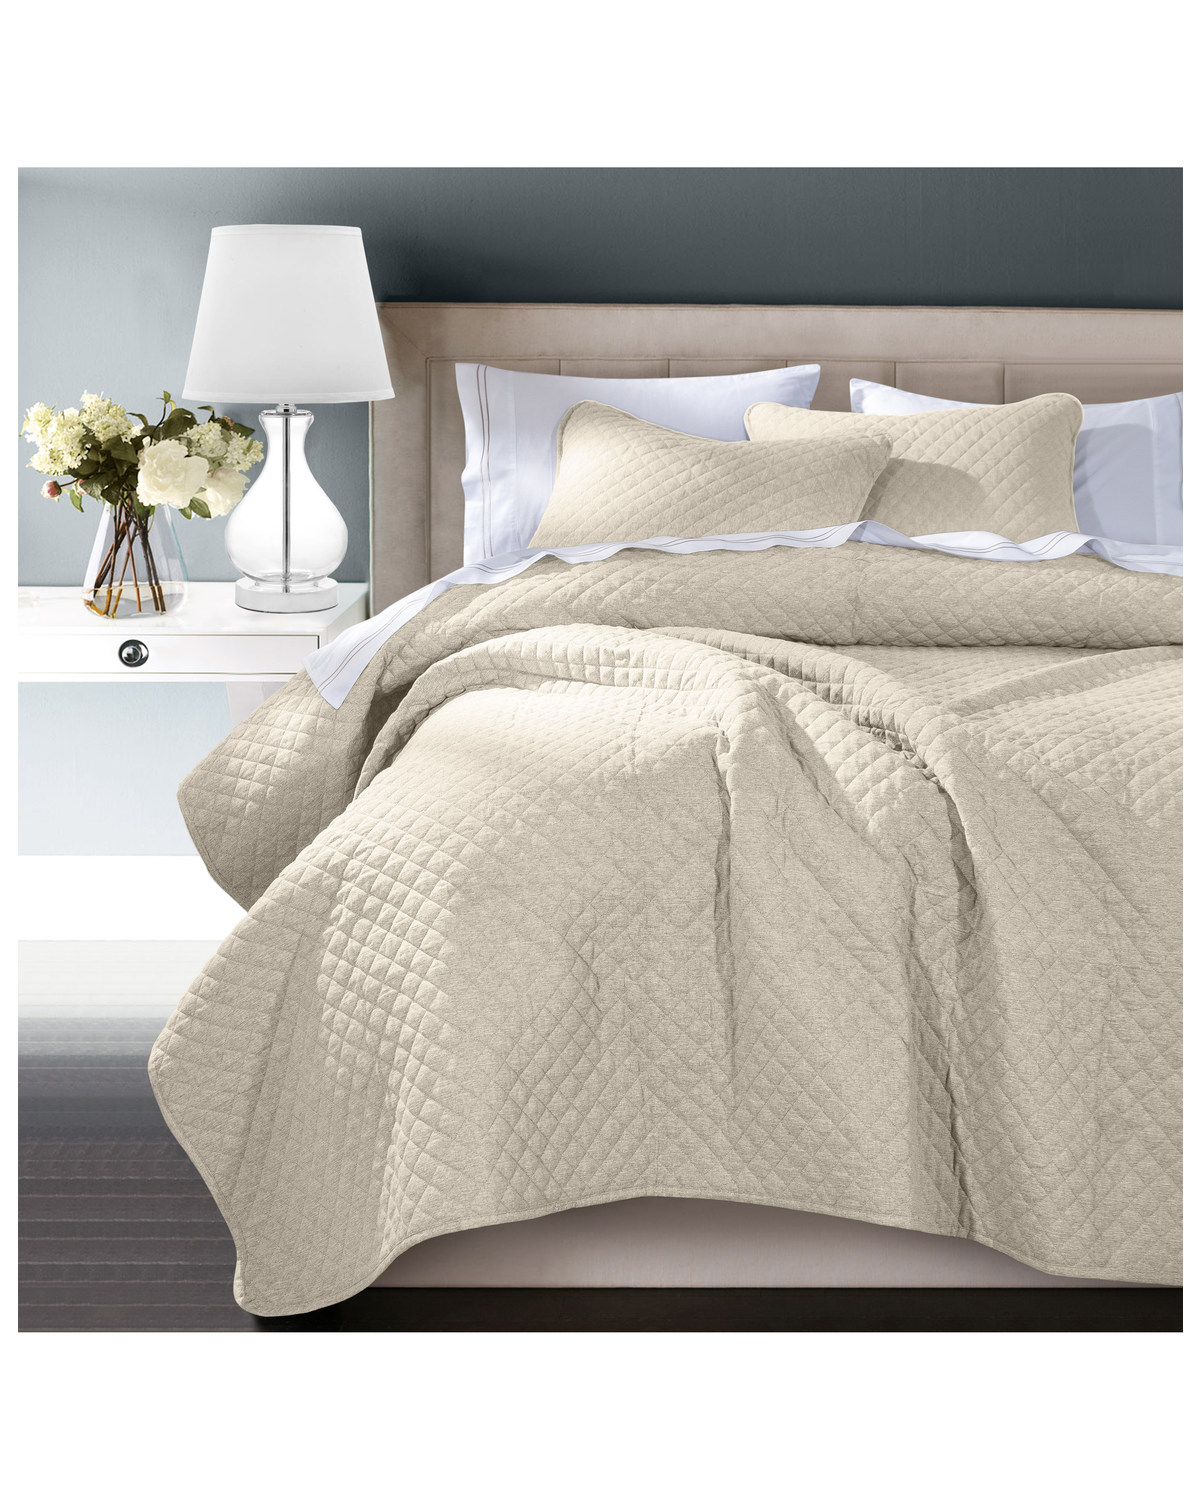 HiEnd Accents 3pc Anna Coverlet Set - Full/Queen